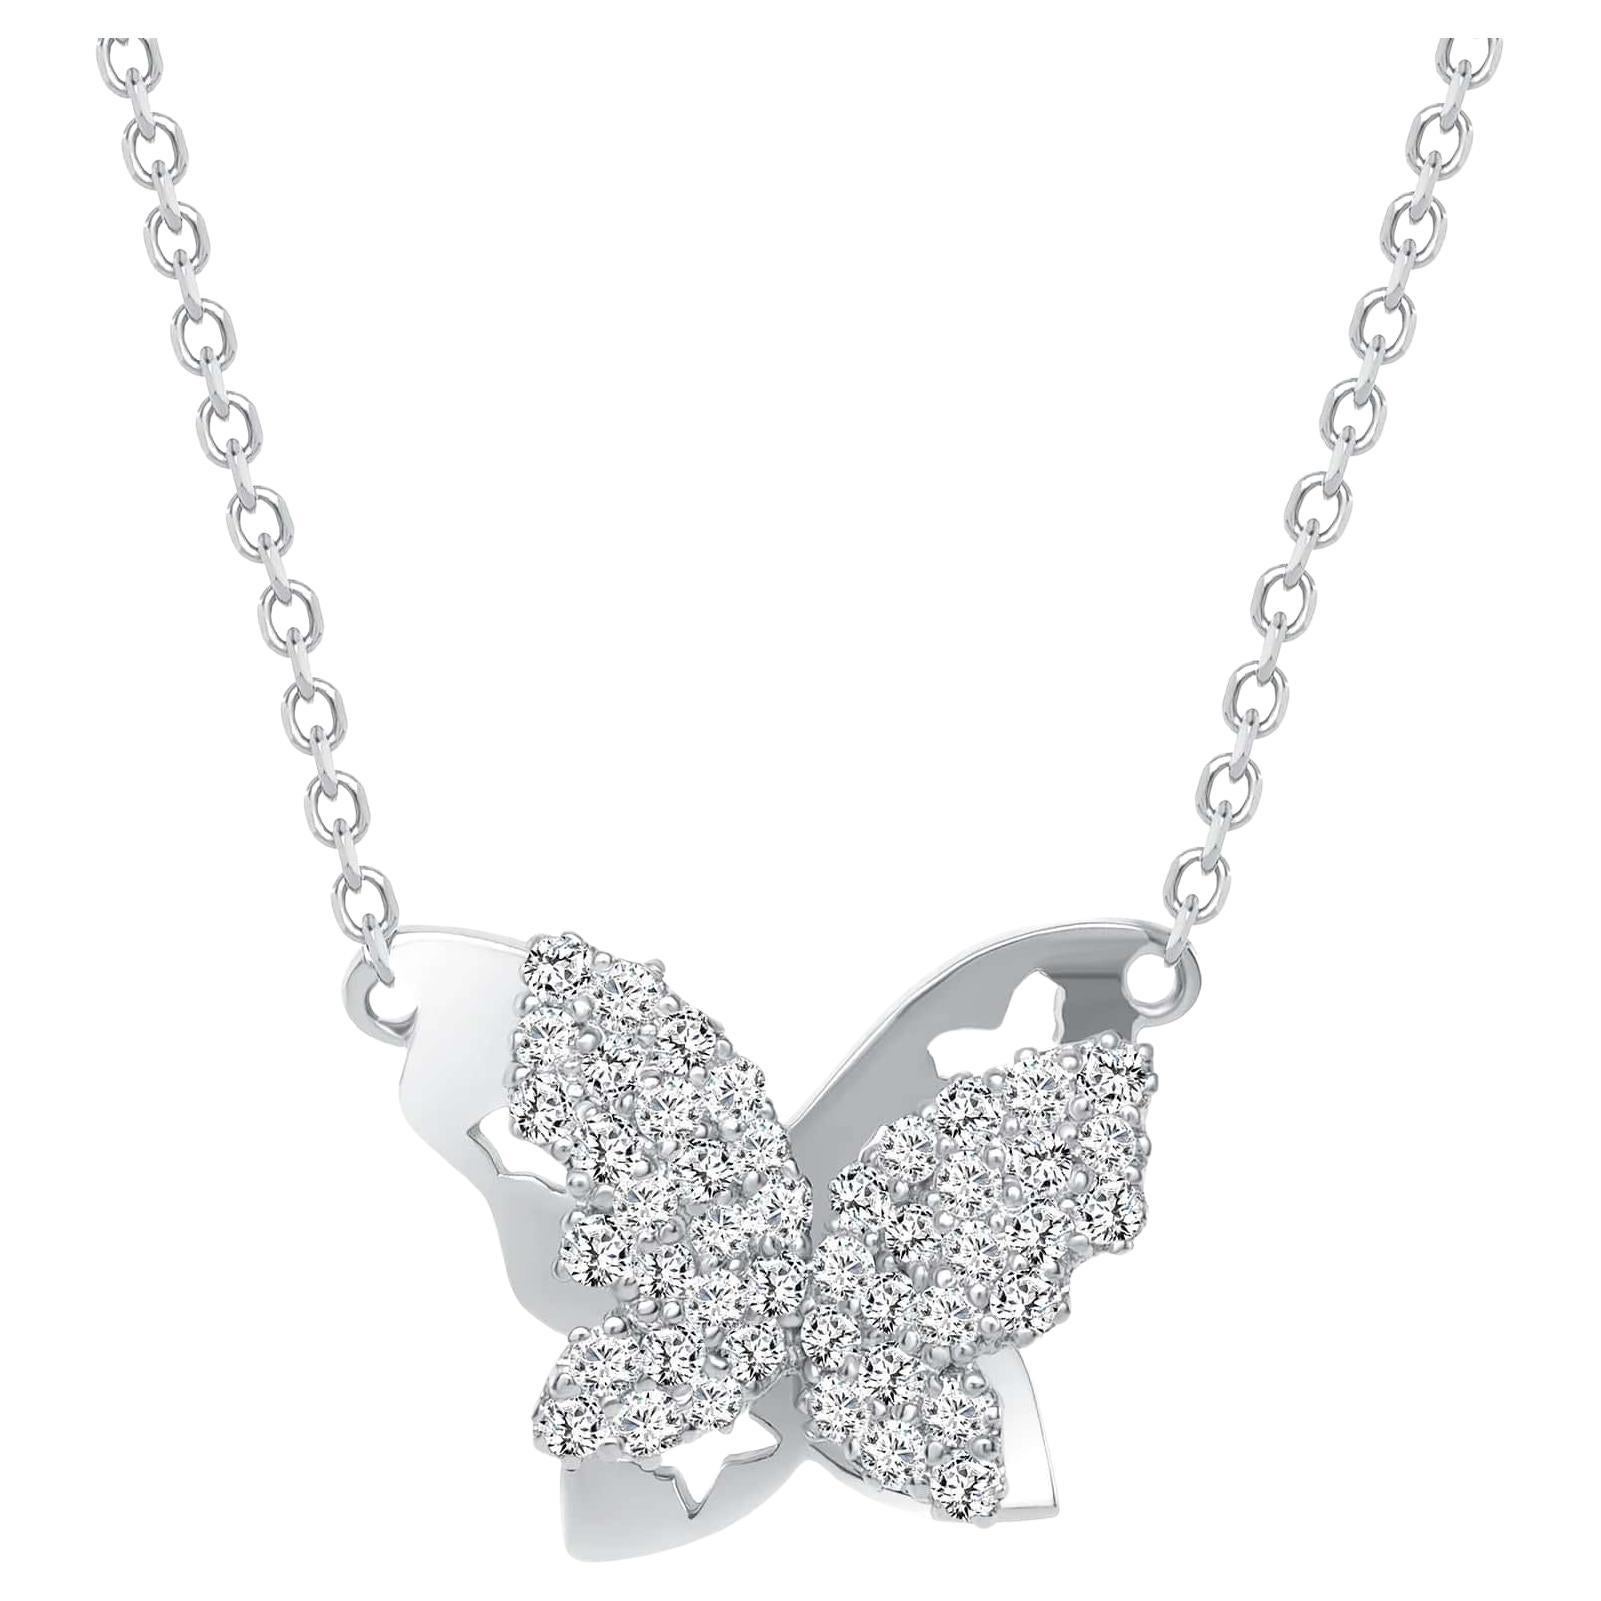 A beautiful Dazzling Butterfly Pendant Necklace adorned by small natural Round Cut Diamonds in Pave Setting. A thoughtful gift for Anniversary, Birthday, Graduation, Valentine's, and Holidays for someone you love

Necklace Information
Gold : 14k